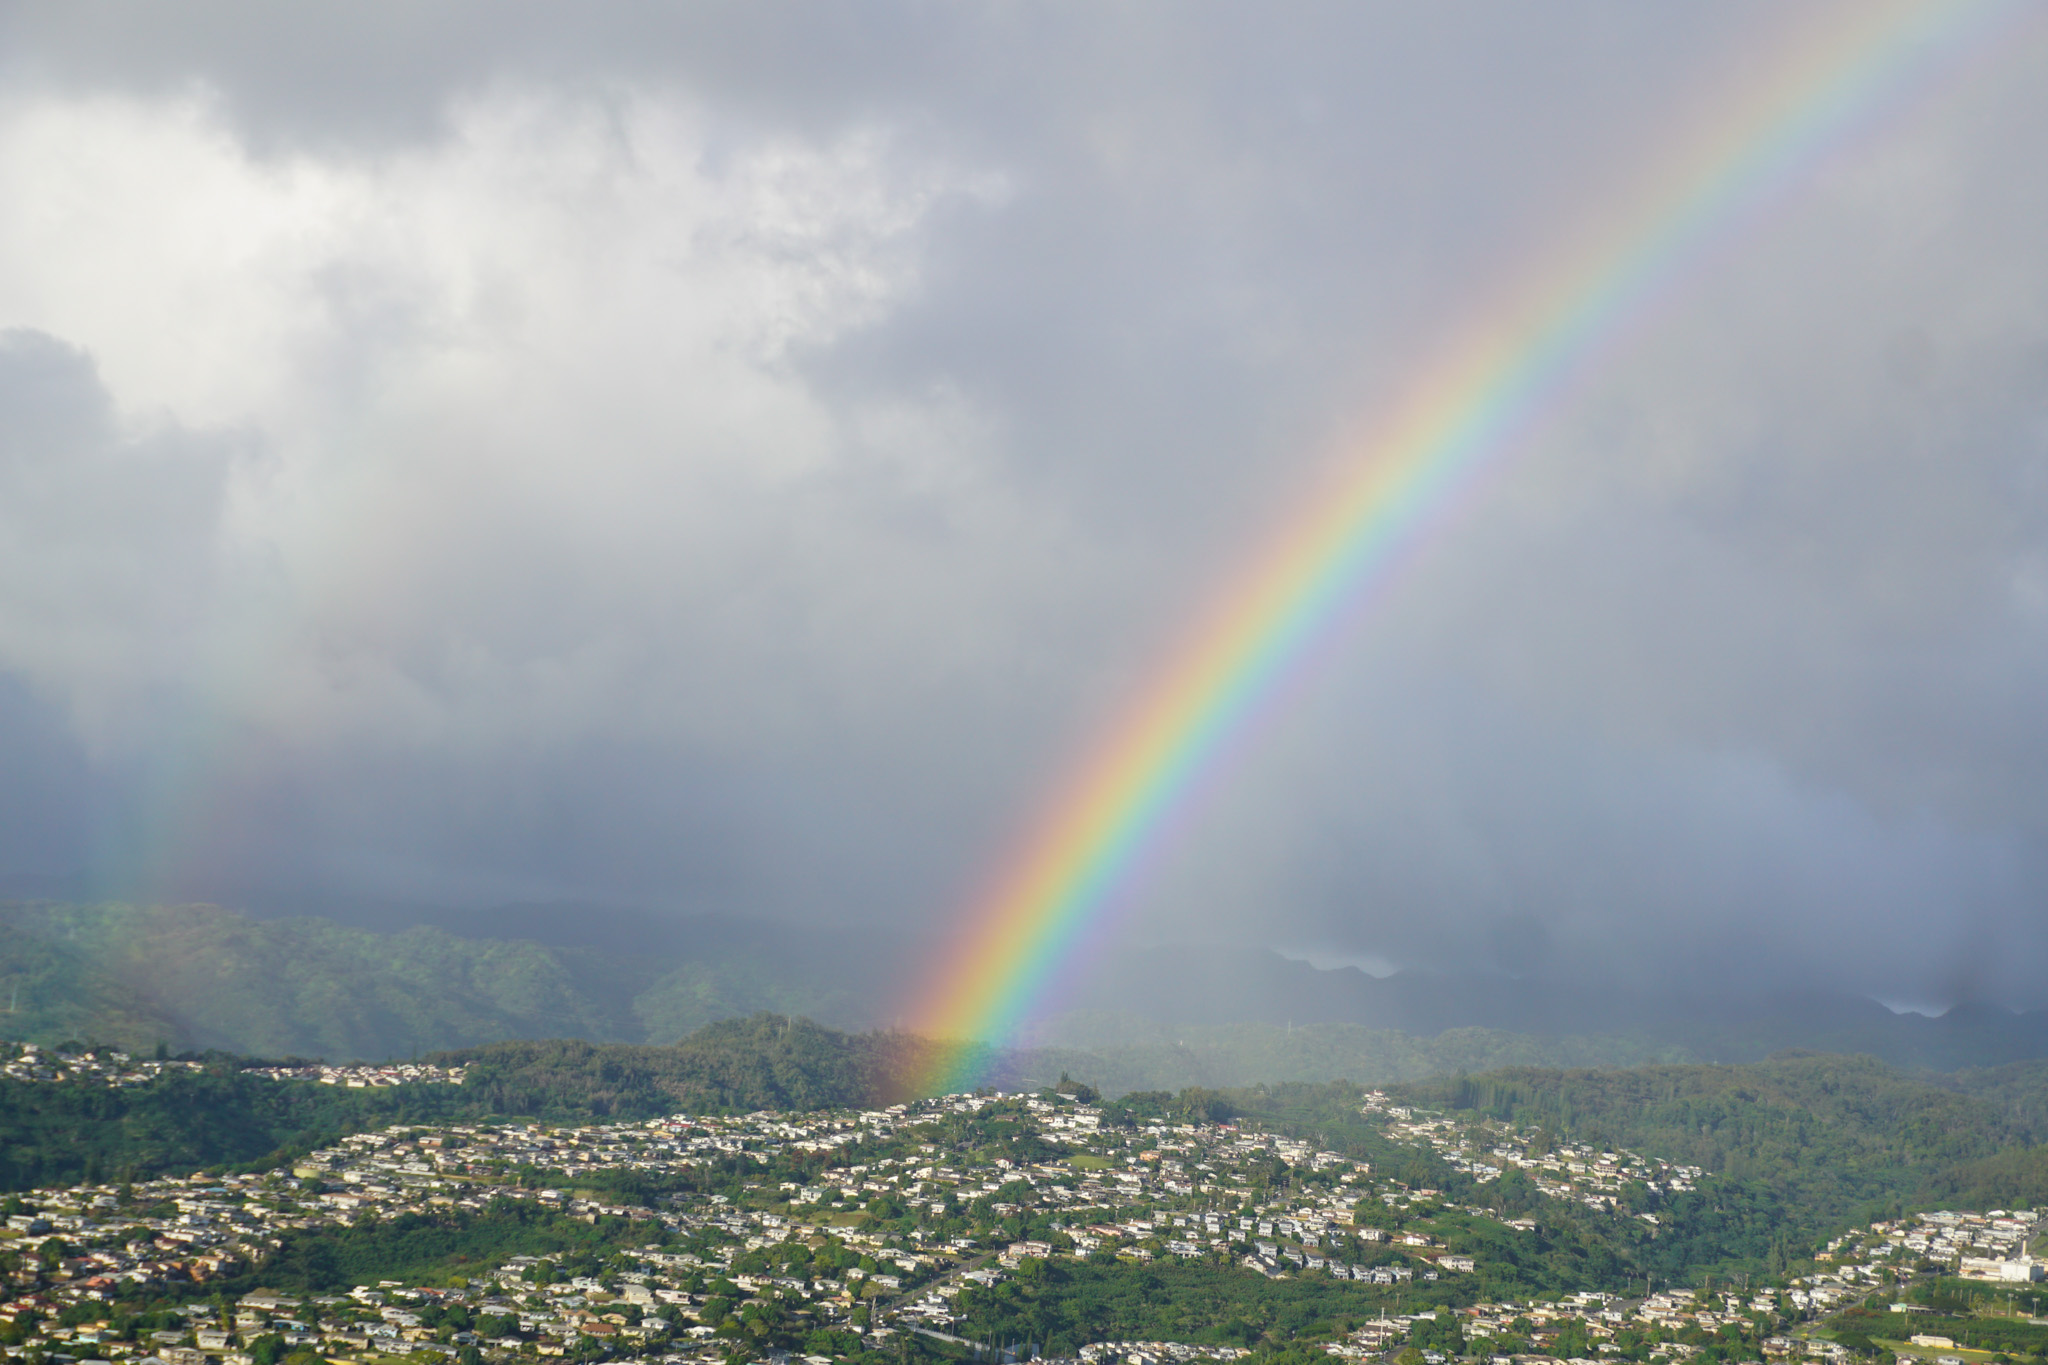 Rainbow above town on Oahu